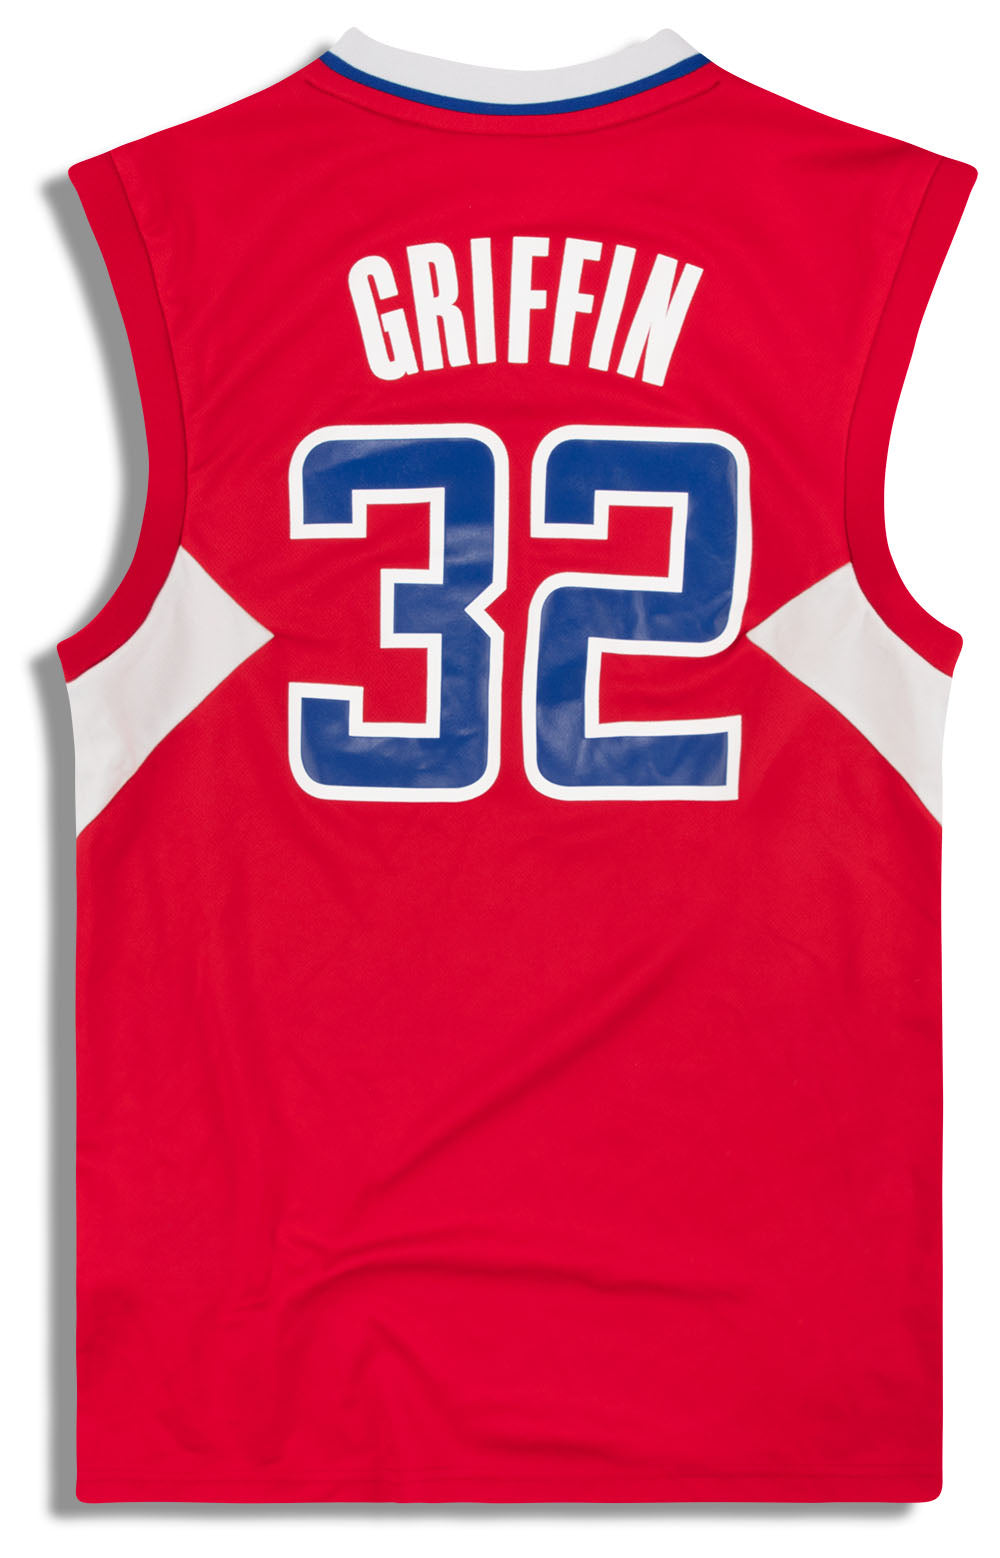 Blake Griffin Los Angeles Clippers #32 Jersey player shirt